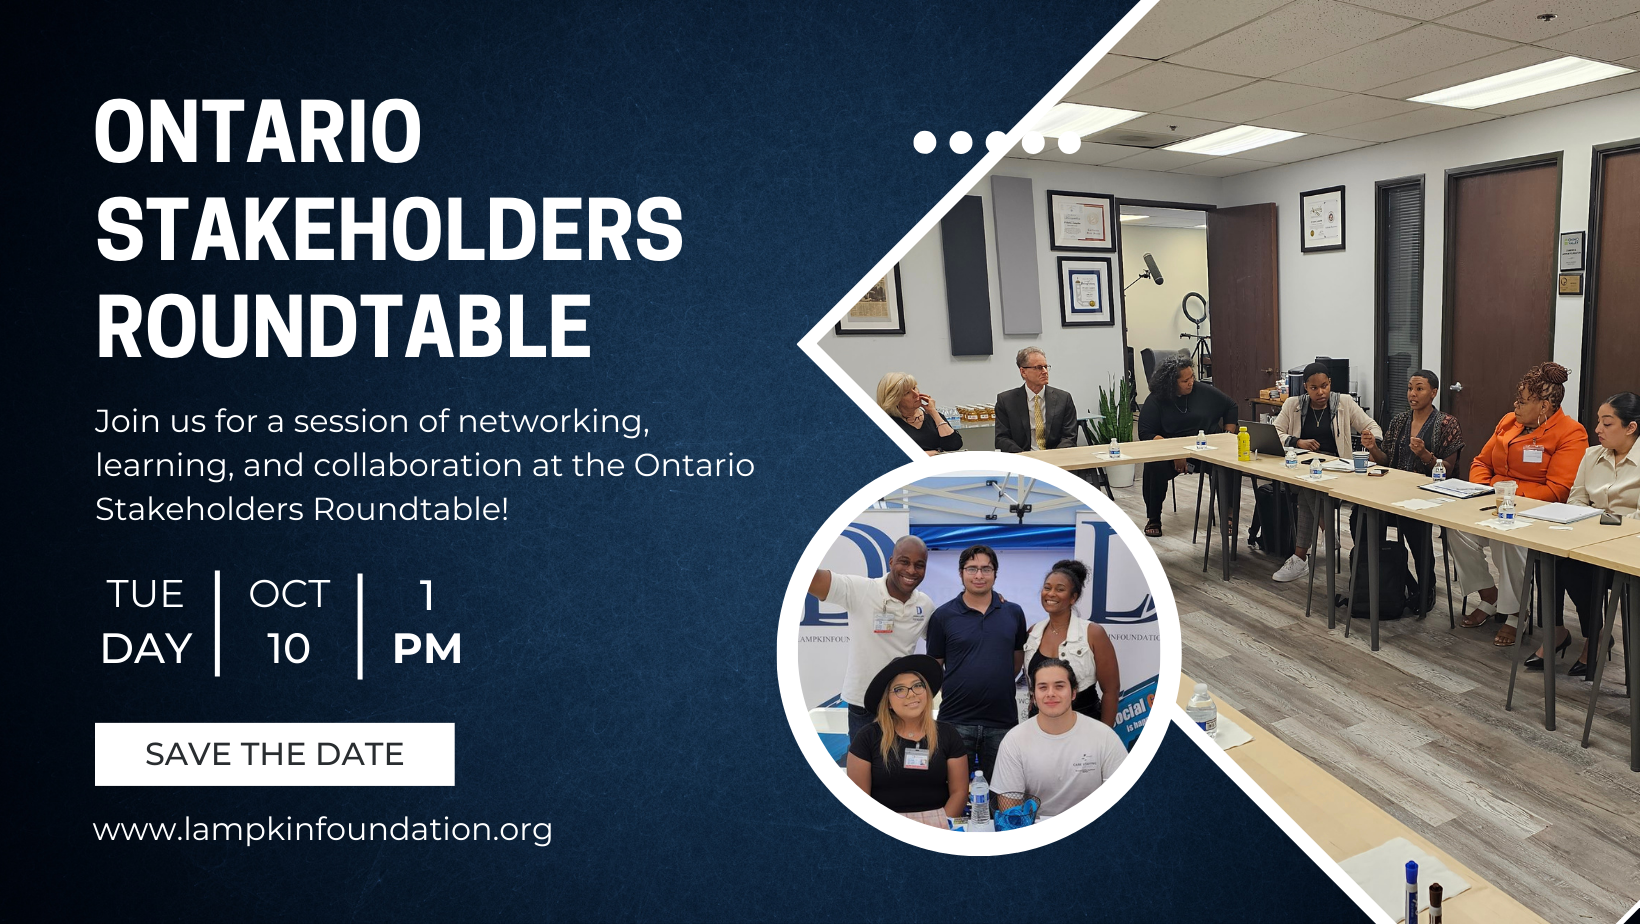 Ontario Stakeholders Roundtable October